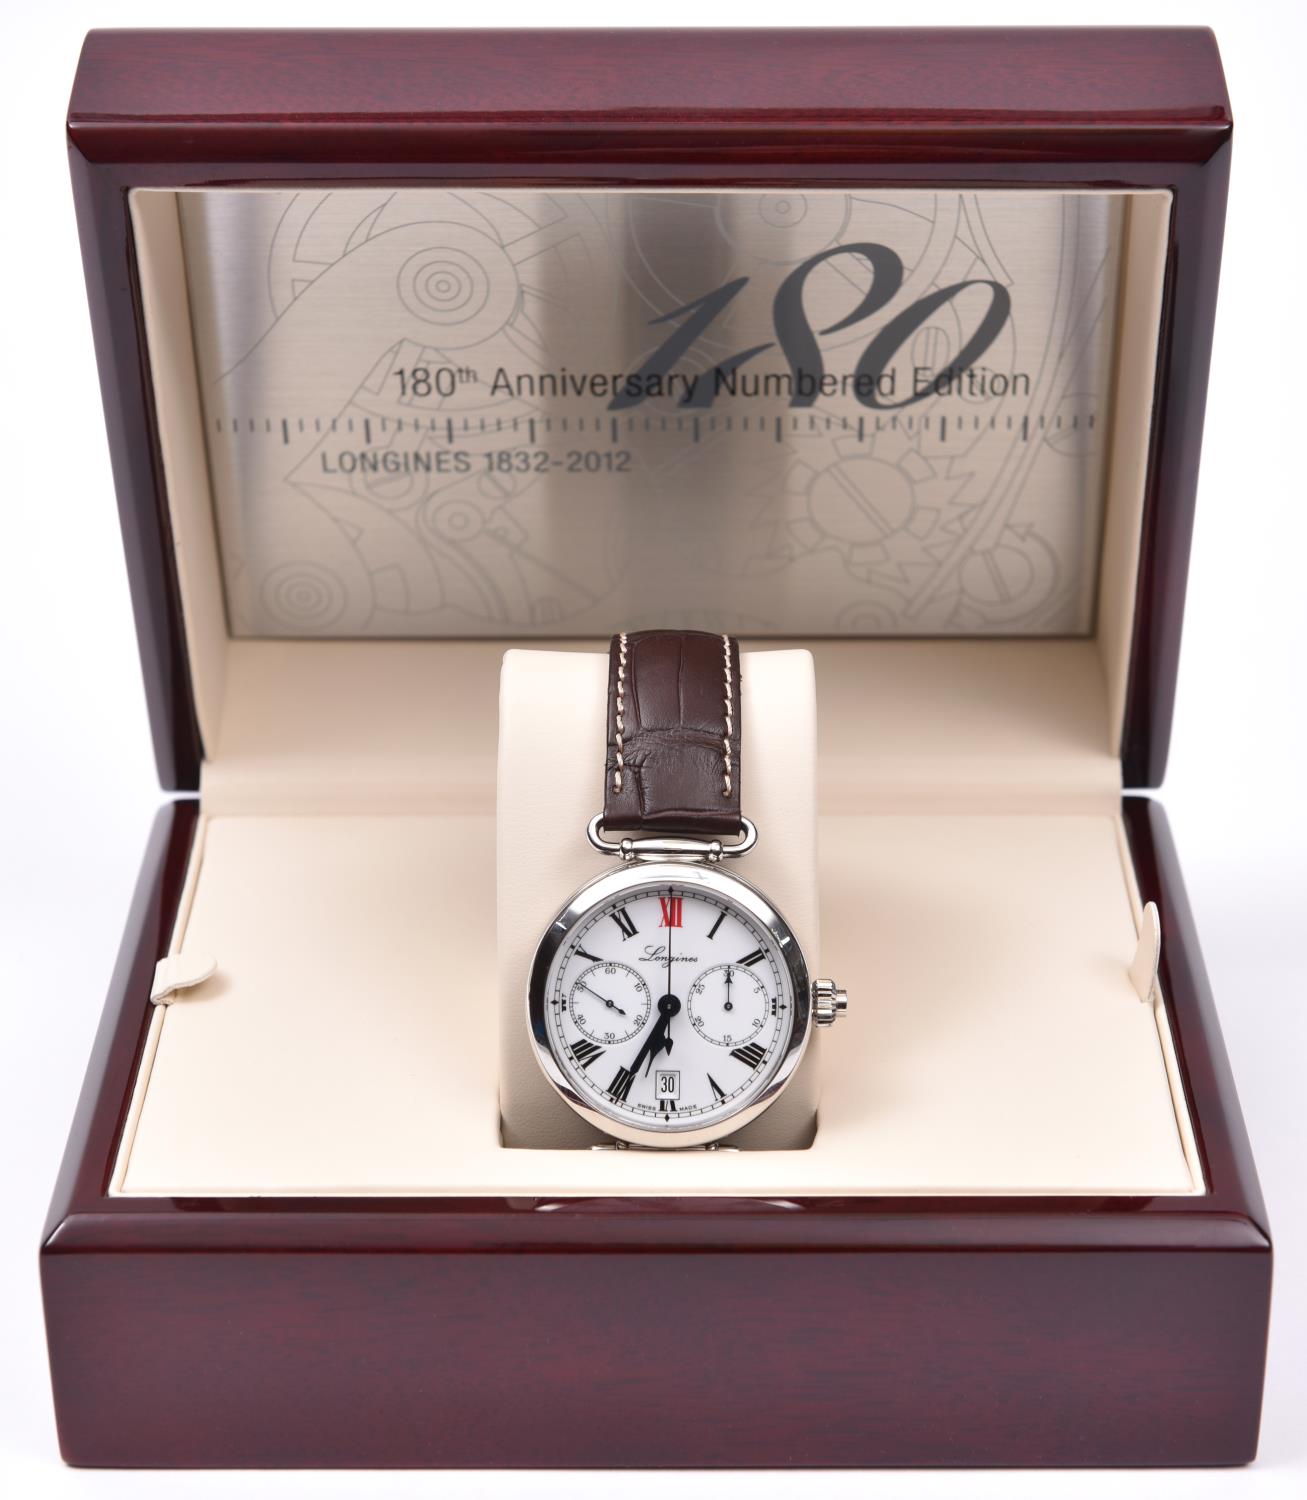 A Longines 180th Anniversary Colomn-Wheel Single Push-Piece Chronograph Automatic watch with - Image 3 of 4